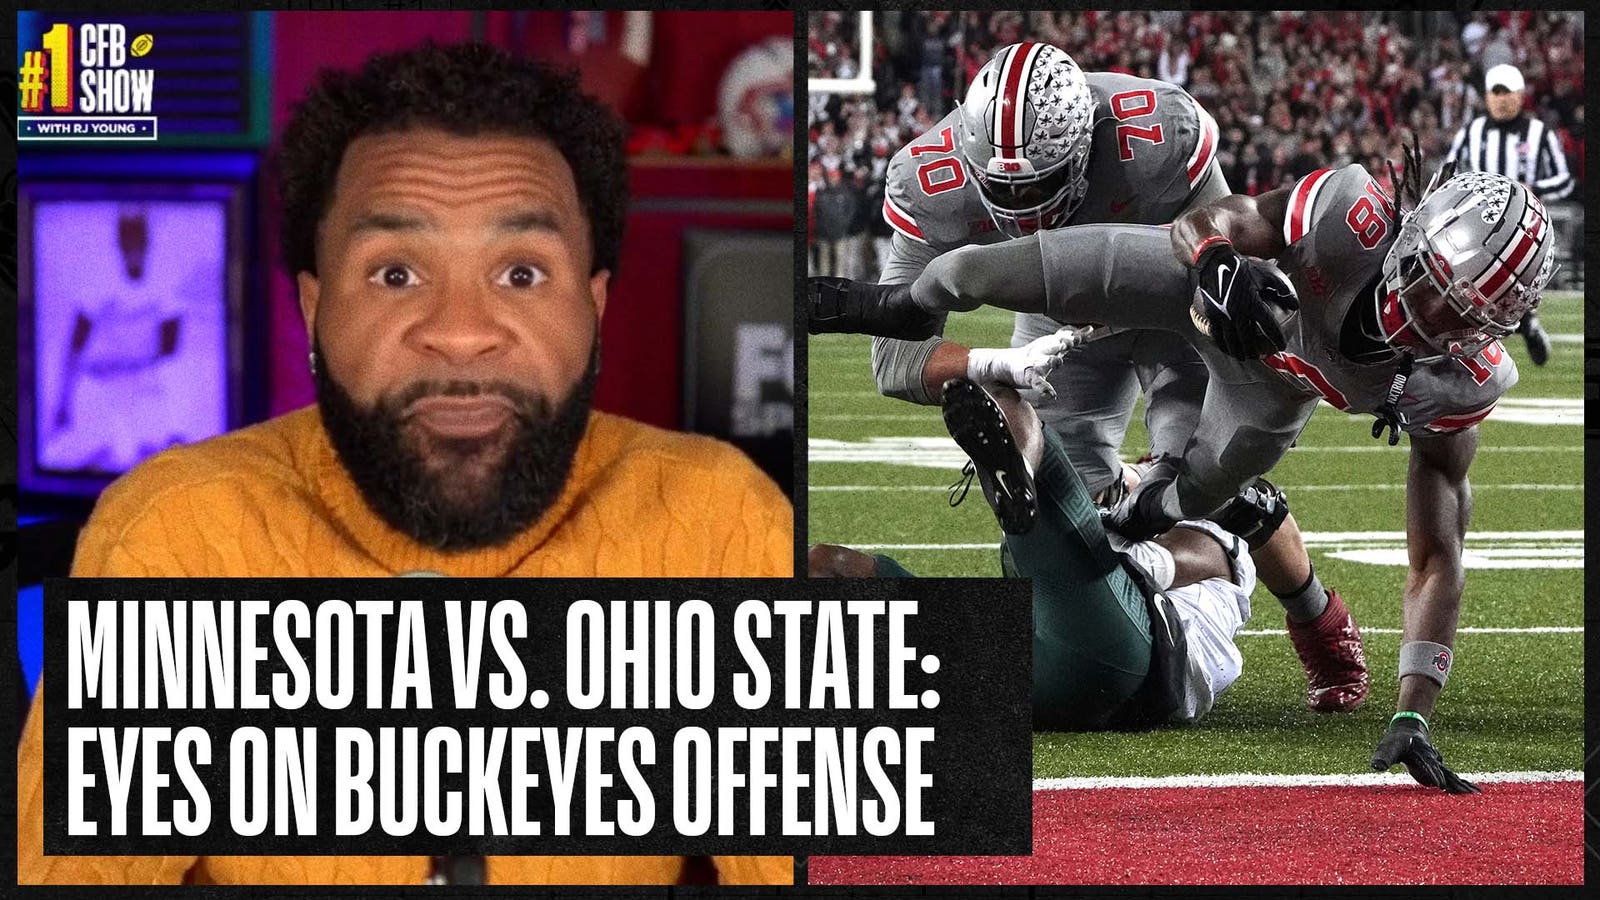 Can the Buckeyes offense find its groove?